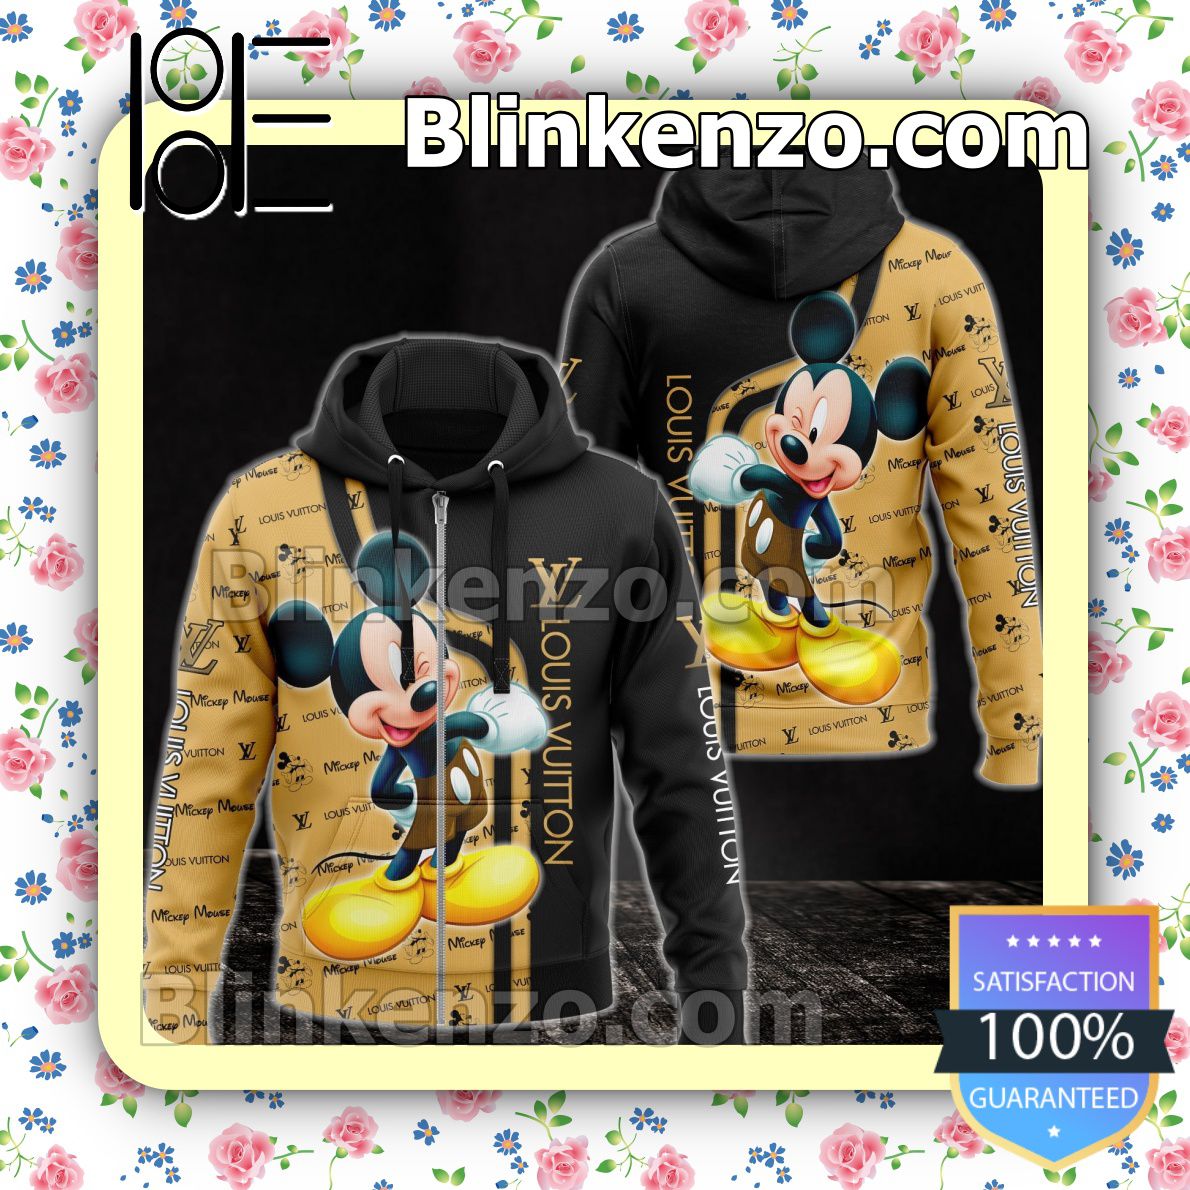 Great Quality Louis Vuitton With Mickey Mouse Full-Zip Hooded Fleece Sweatshirt